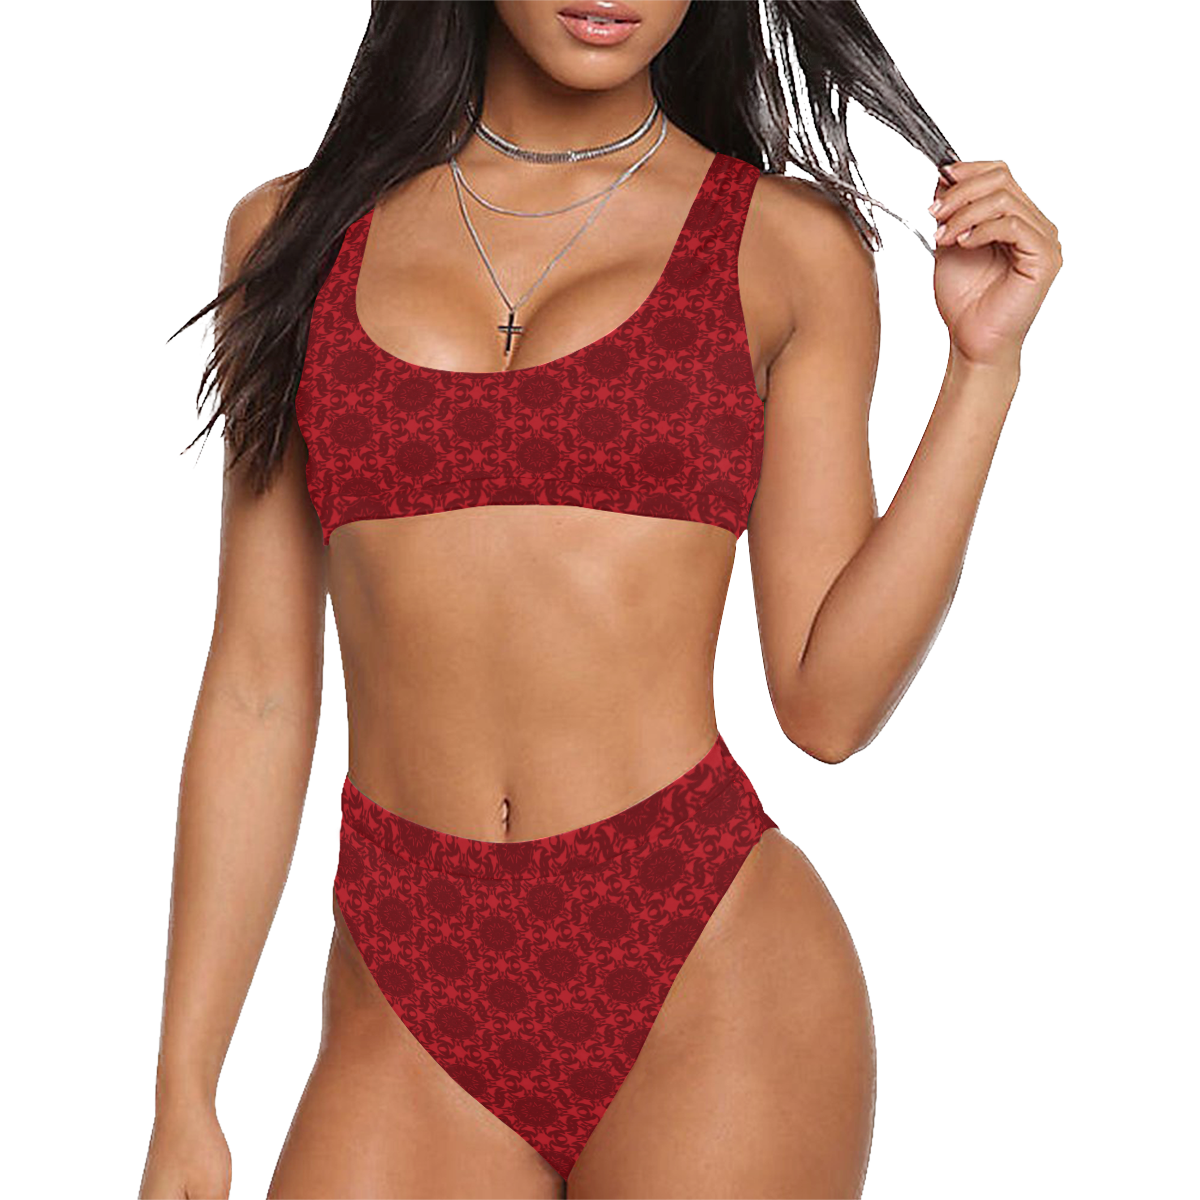 victorian paisley red Sport Top & High-Waisted Bikini Swimsuit (Model S07)